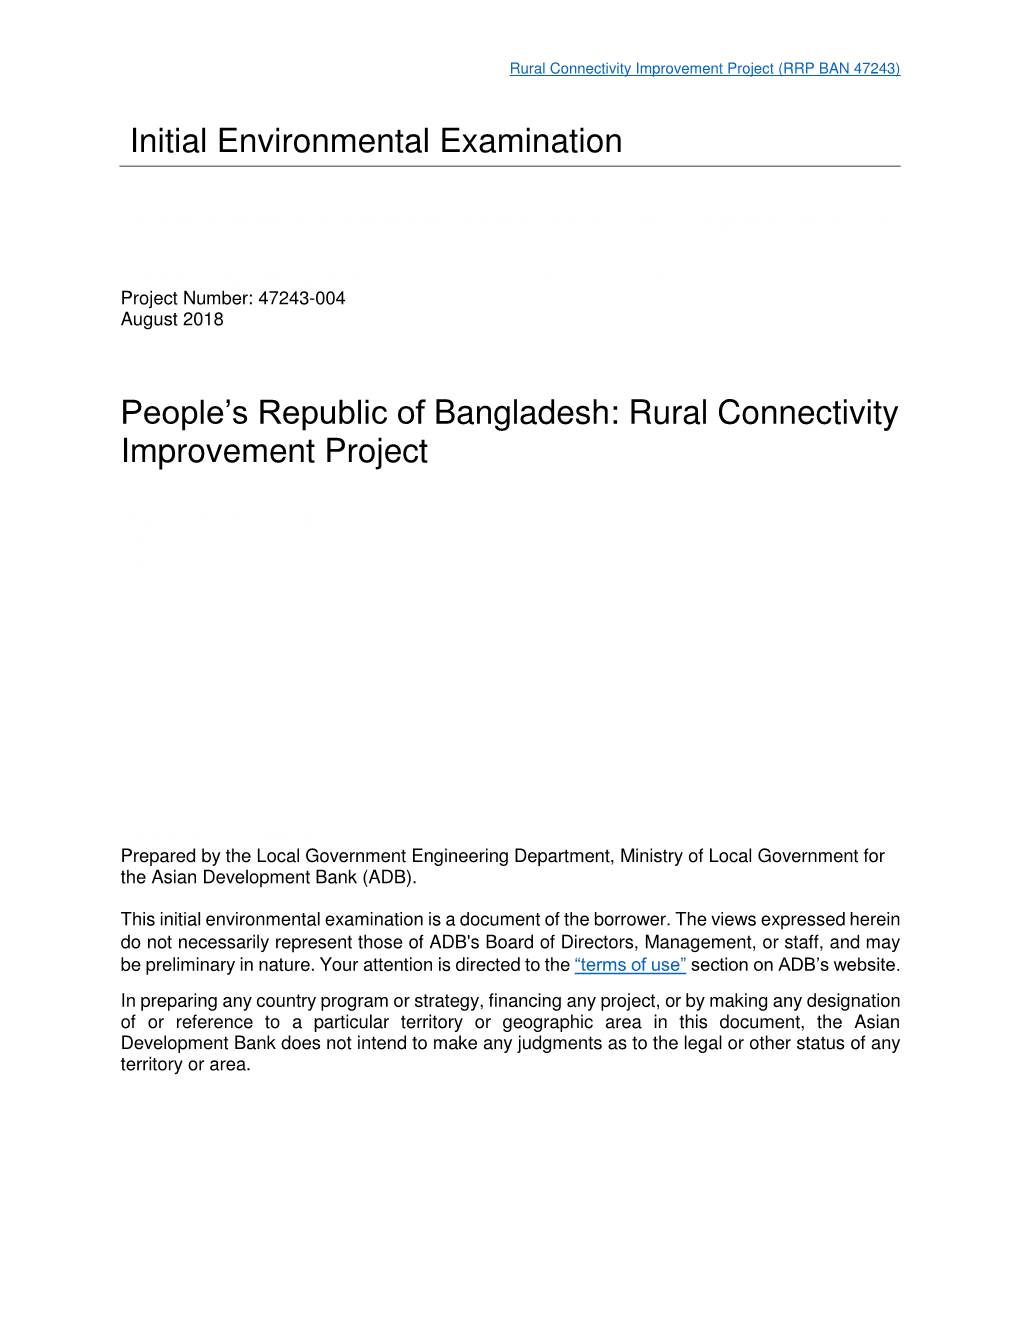 Rural Connectivity Improvement Project: Initial Environmental